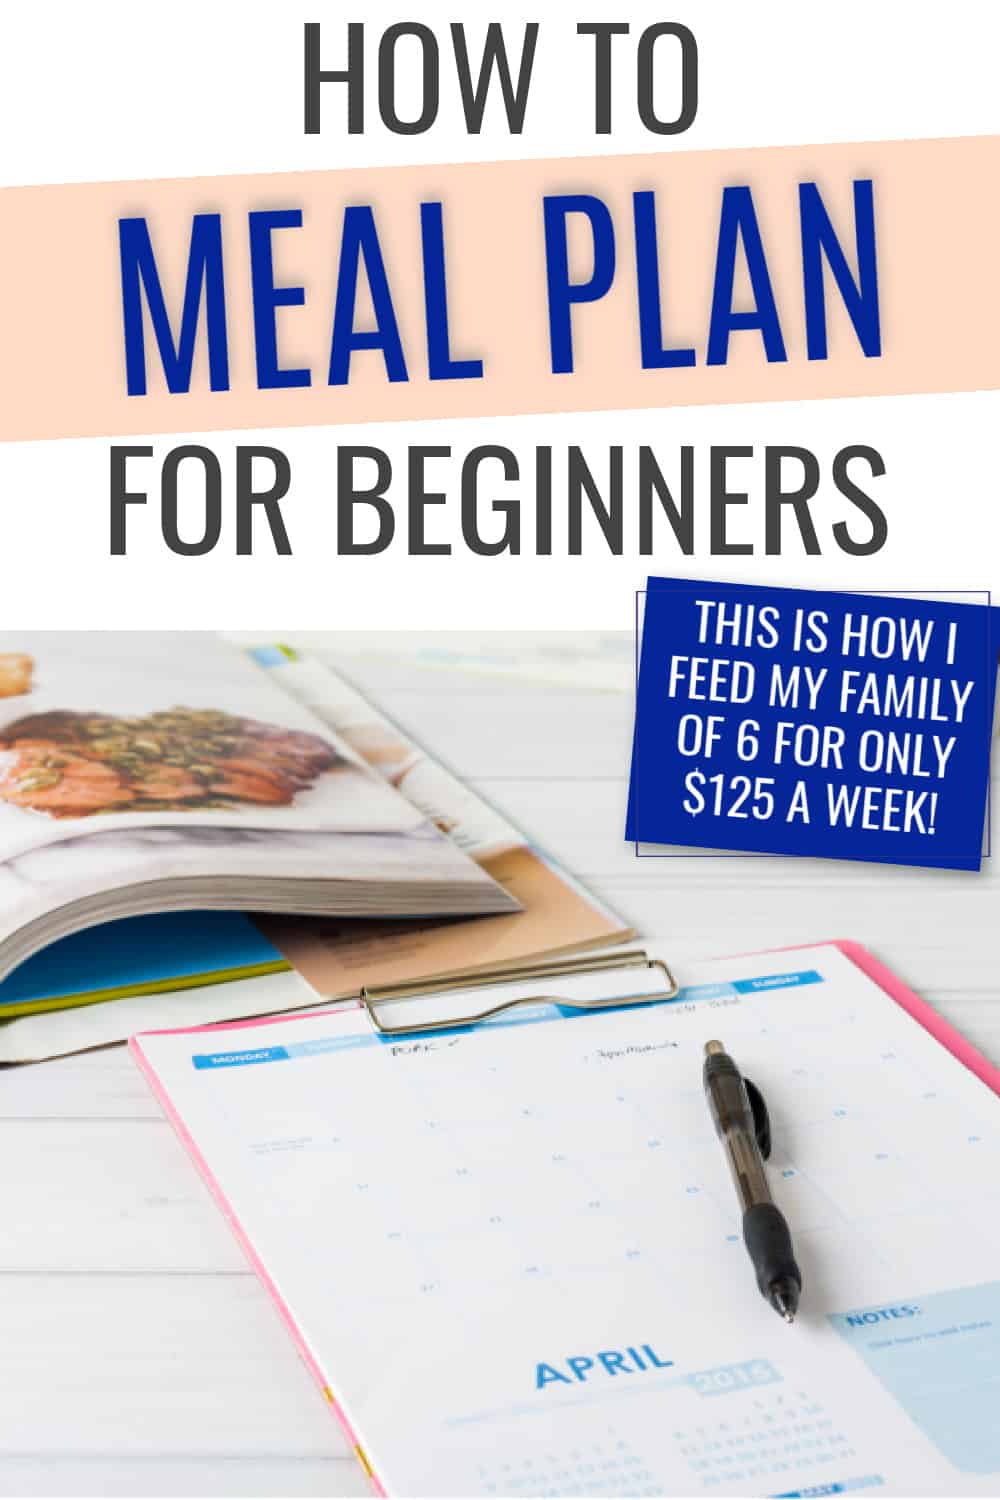 How to Meal Plan for Beginners - The Maximizing Momma